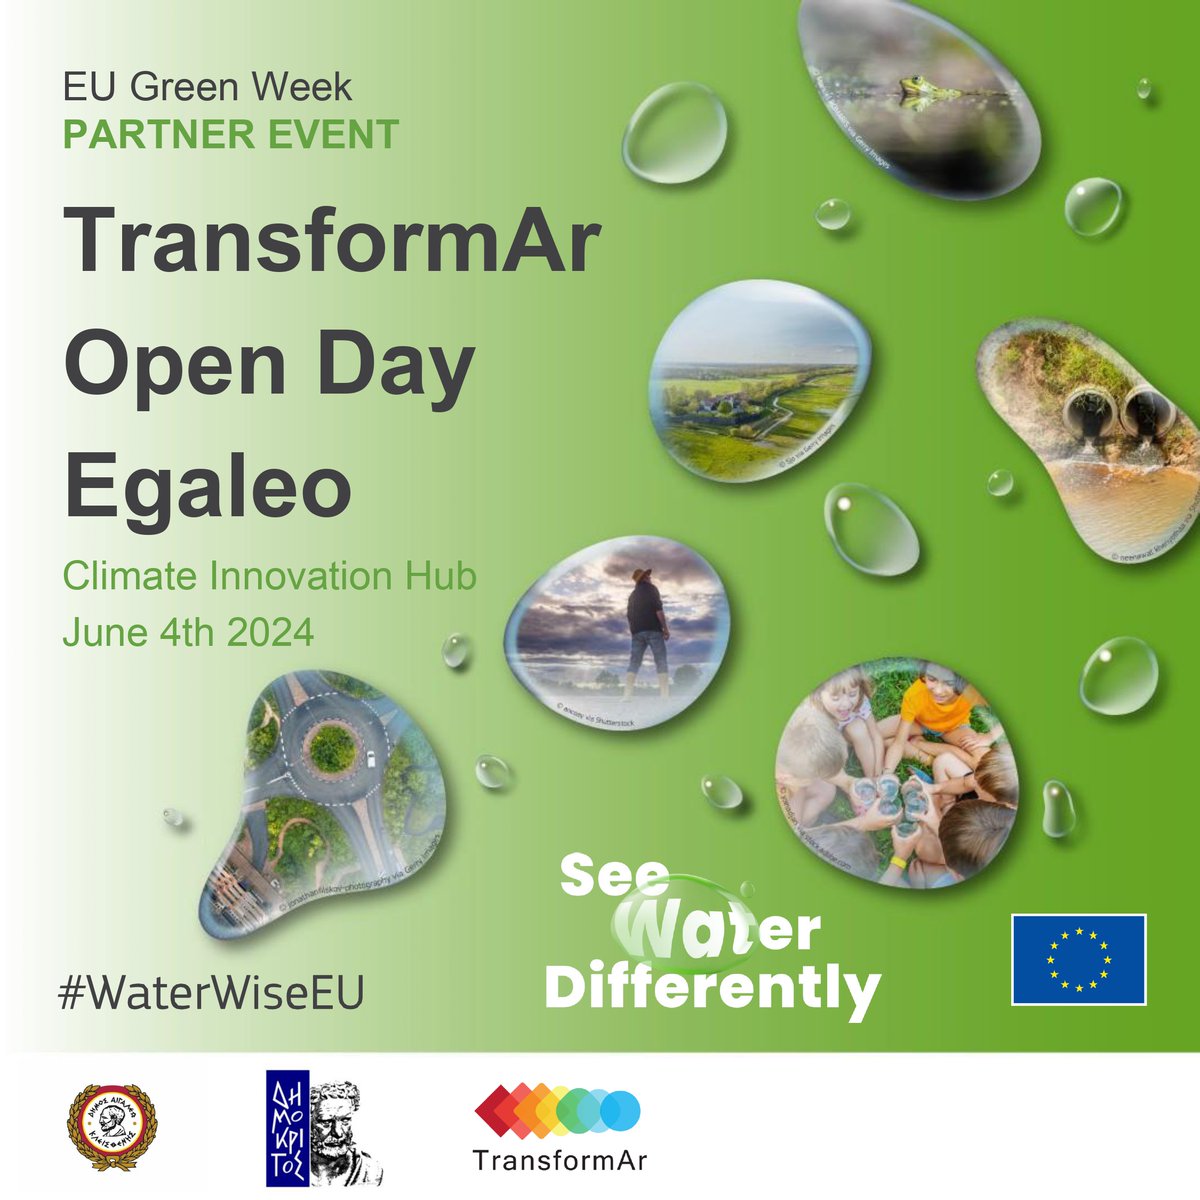 🌞 Learn more about our first Open Day in the city of Egaleo in Greece! Local stakeholders will be invited to check out solutions demonstrated in the city at the local Climate Innovation Hub. 💡 More info about this Open Day on its #EUGreenWeek page: lnkd.in/eX_Px7Ys